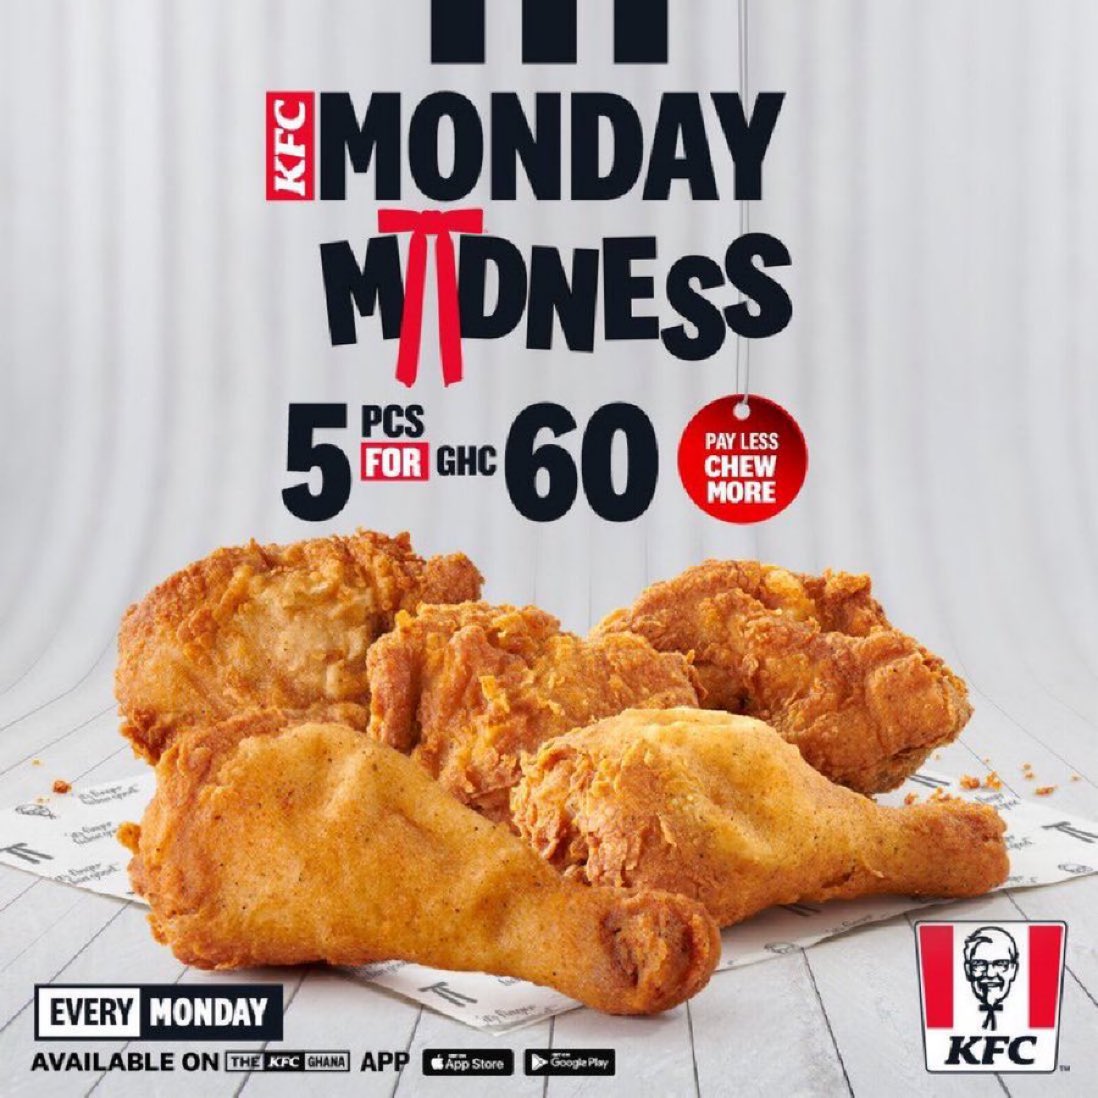 Look sharp and go to any @KFCGhana branch for your #KFCMondayMadness With just 60gh , you can get 5 pieces of chicken